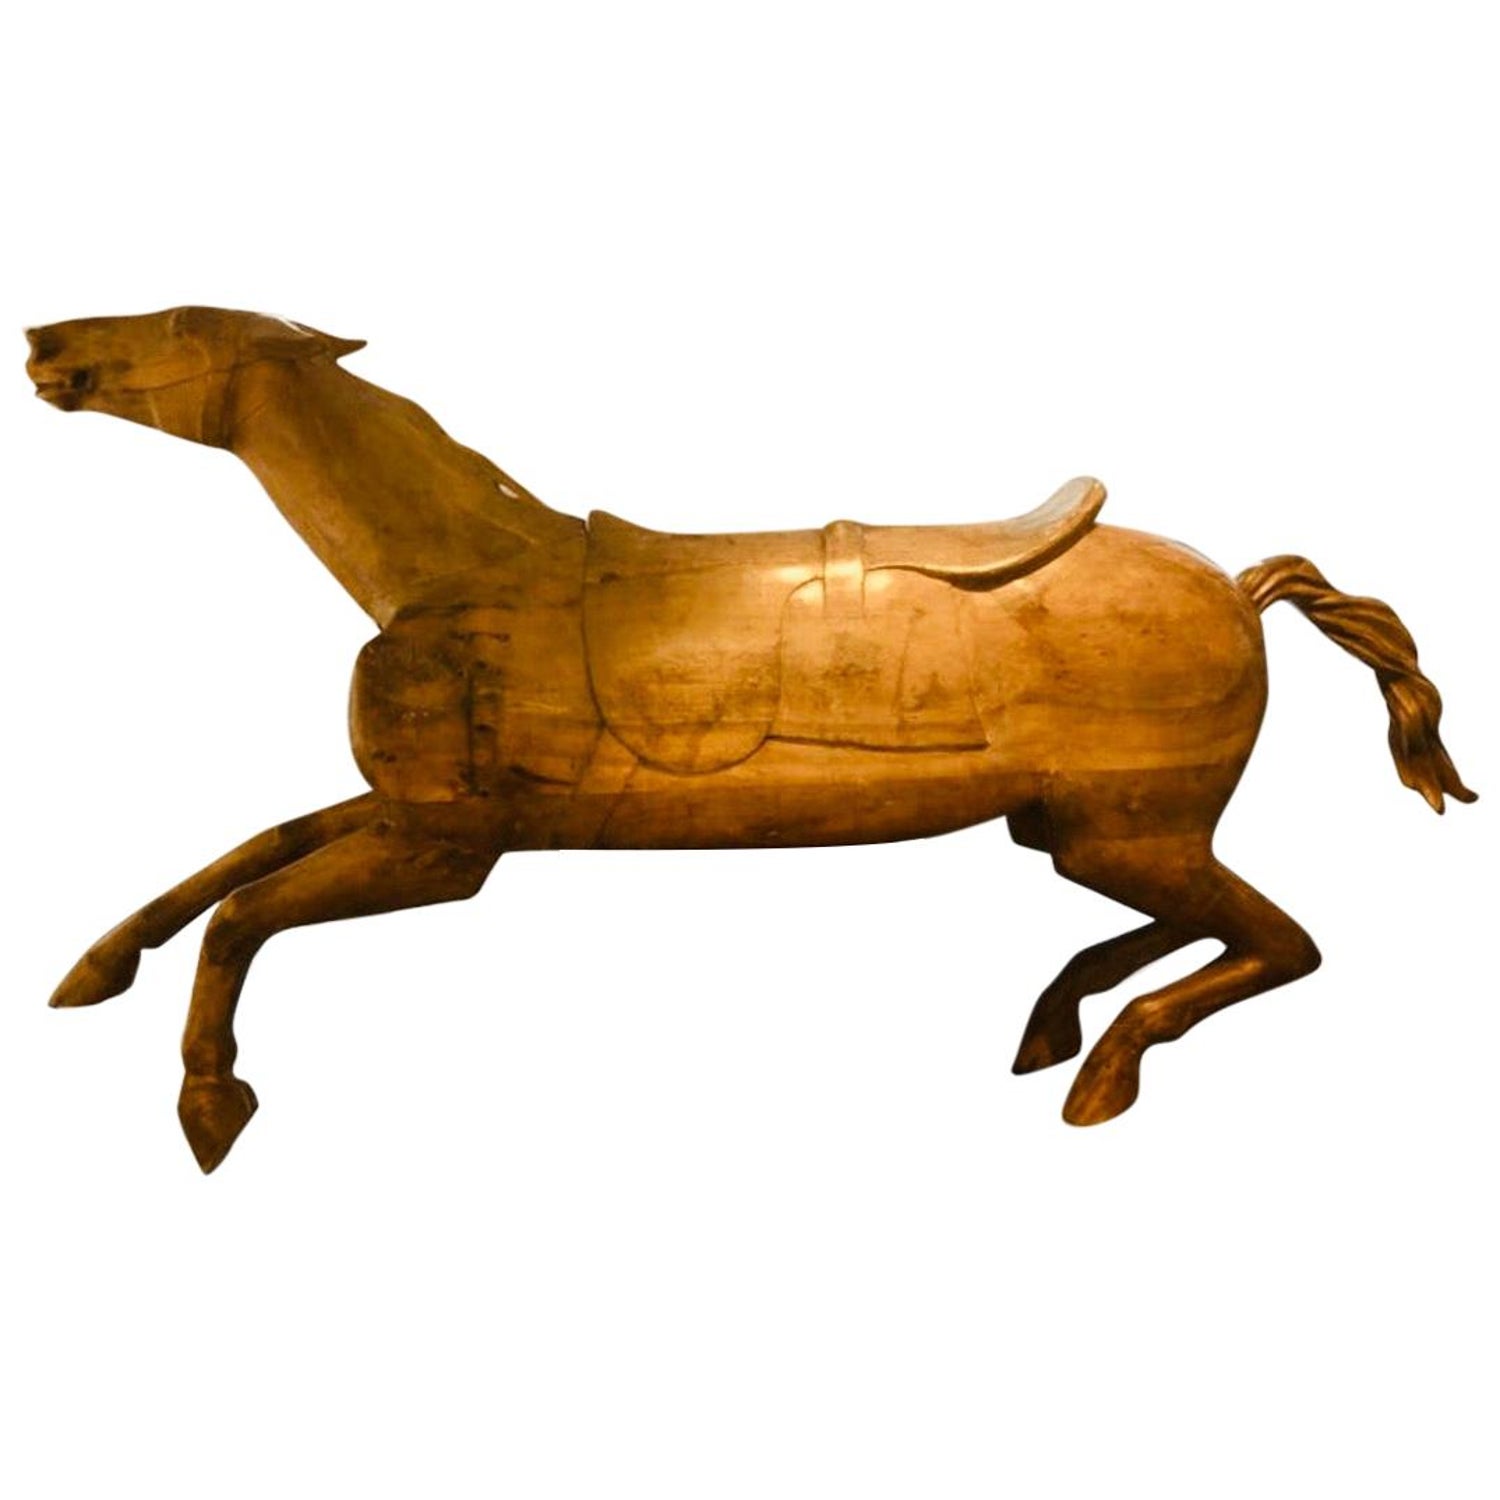 Rare Carousel Jumping Horse Illions Derby Racer by Marcus Charles Illions  For Sale at 1stDibs | illions carousel horse for sale, derby racer  carousel, marcus illions